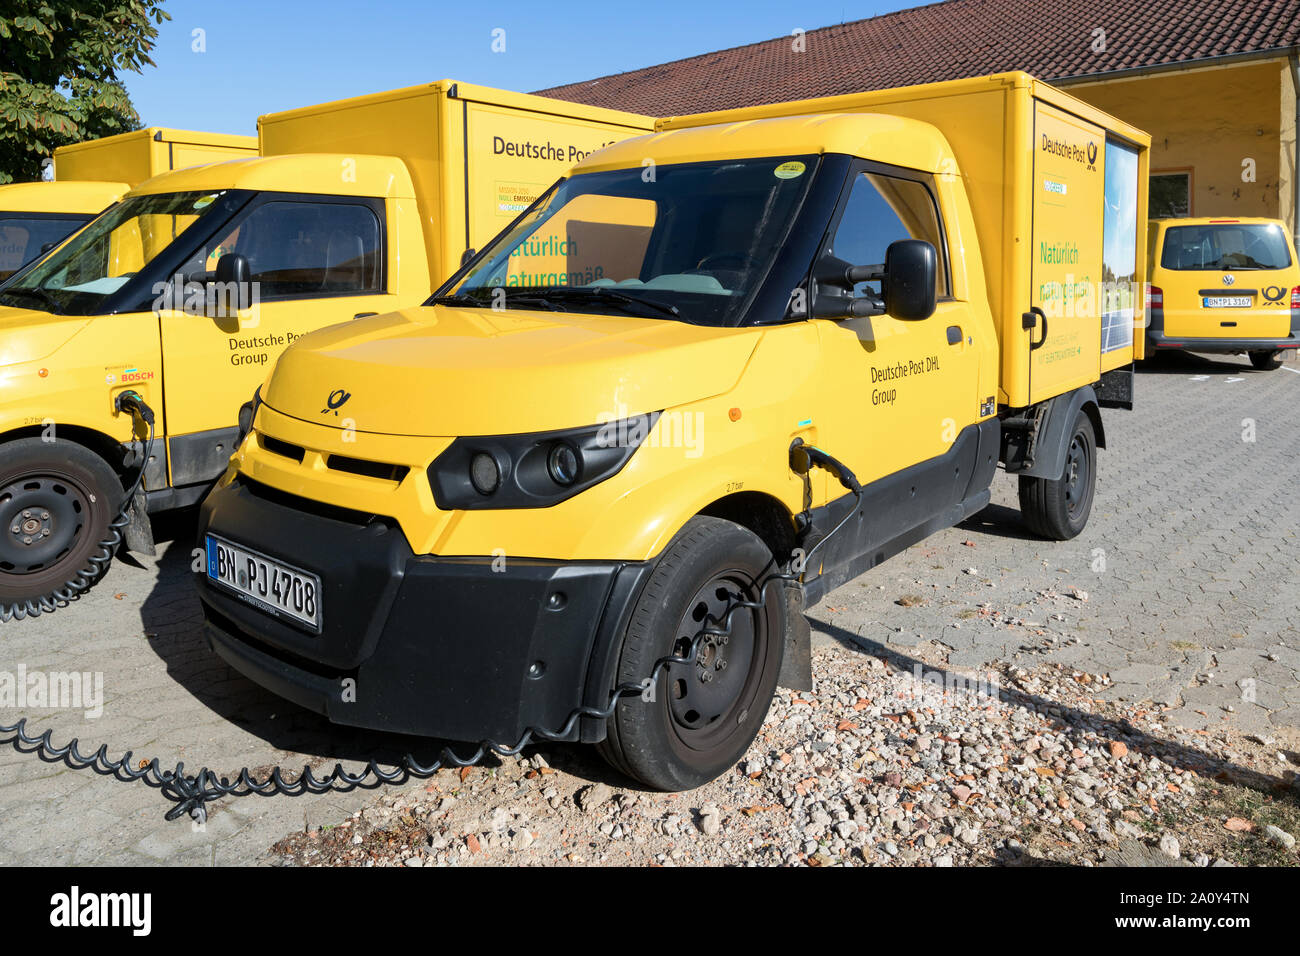 Dhl electric car hires stock photography and images Alamy